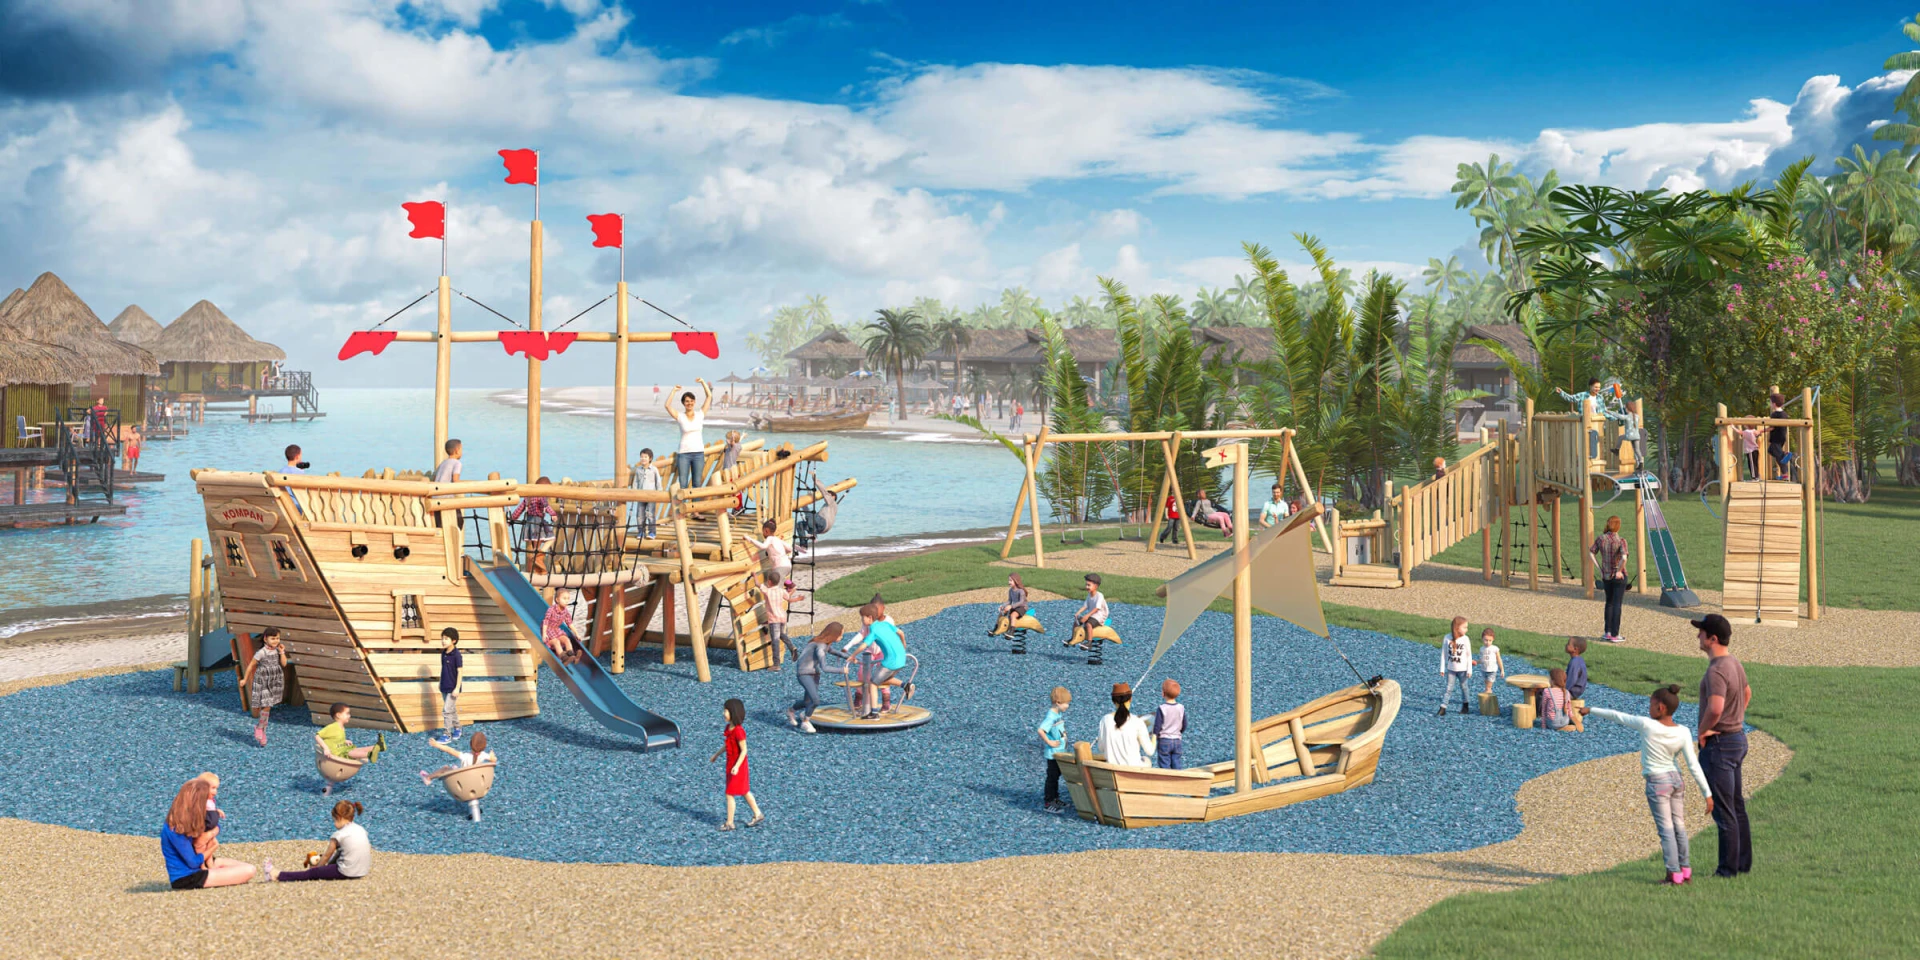 A pirate themed playground design solution from KOMPAN